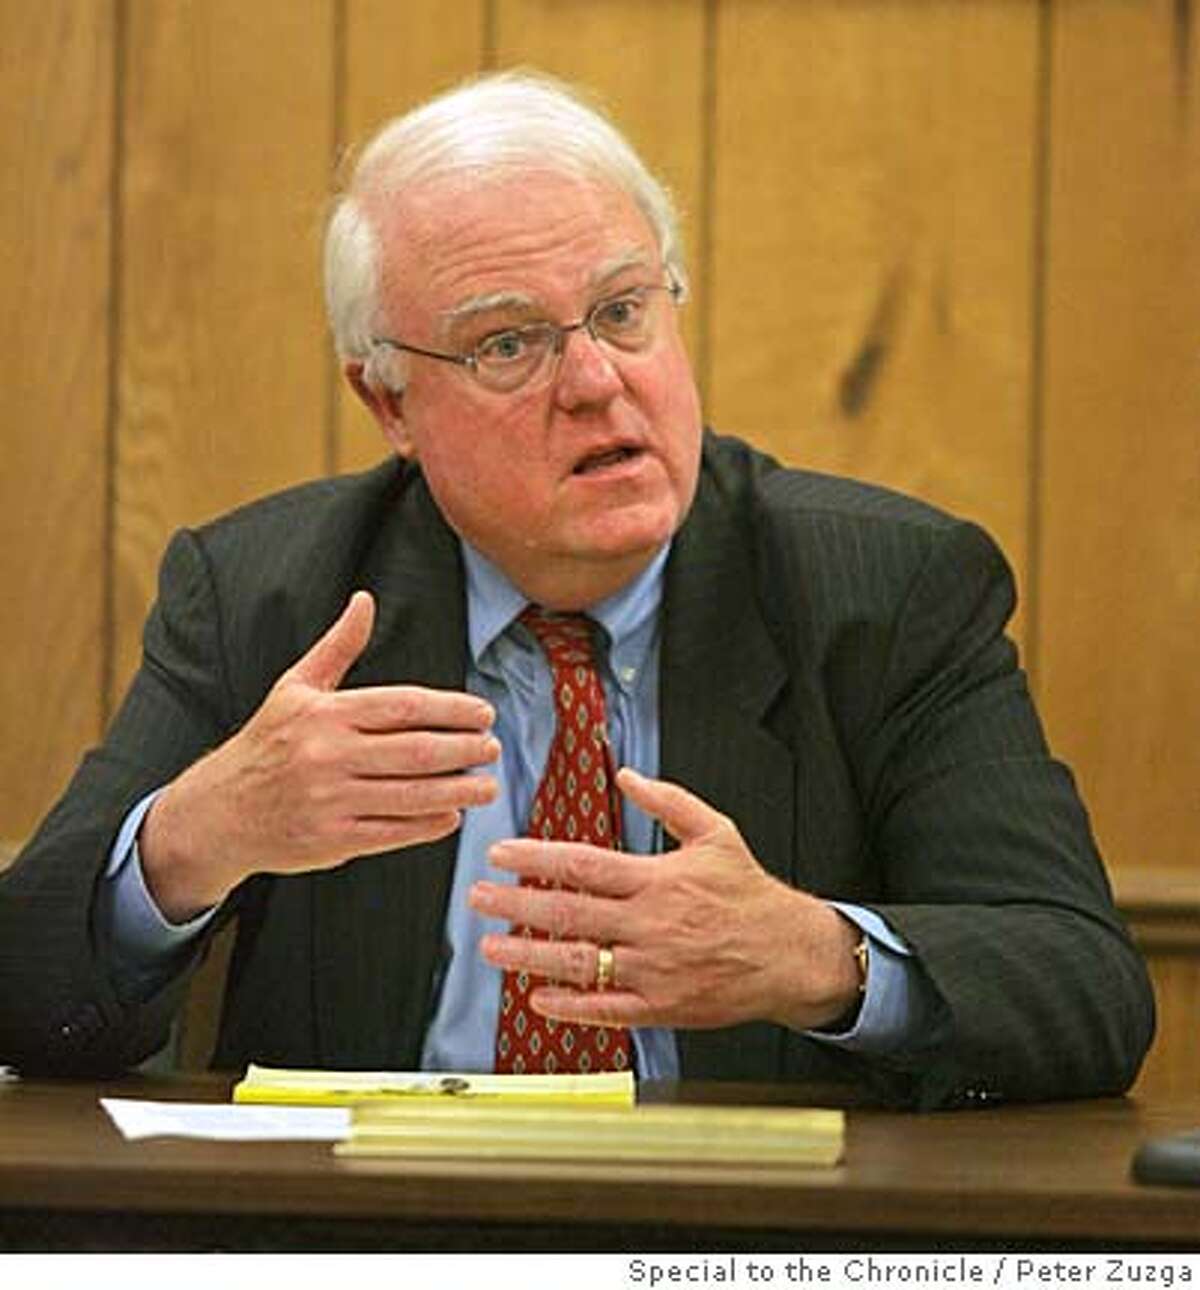 SENSENBRENNER 2 OF 4--Rep. James Sensenbrenner answers a constituant's question during a town hall meeting held by the Congressman in the Thiensville Town Hall Sunday, June 25, 2006, in Thiensville, Wis. (Peter Zuzga/Special to the Chronicle) Ran on: 06-29-2006 Rep. James Sensenbren- ner says he will try today to get a majority of his committee to OK the bill. Ran on: 07-03-2006 James Sensenbrenner is one of the GOPs leaders on immigration policy. Ran on: 07-03-2006 James Sensenbrenner is one of the GOPs leaders on immigration policy. Ran on: 07-03-2006